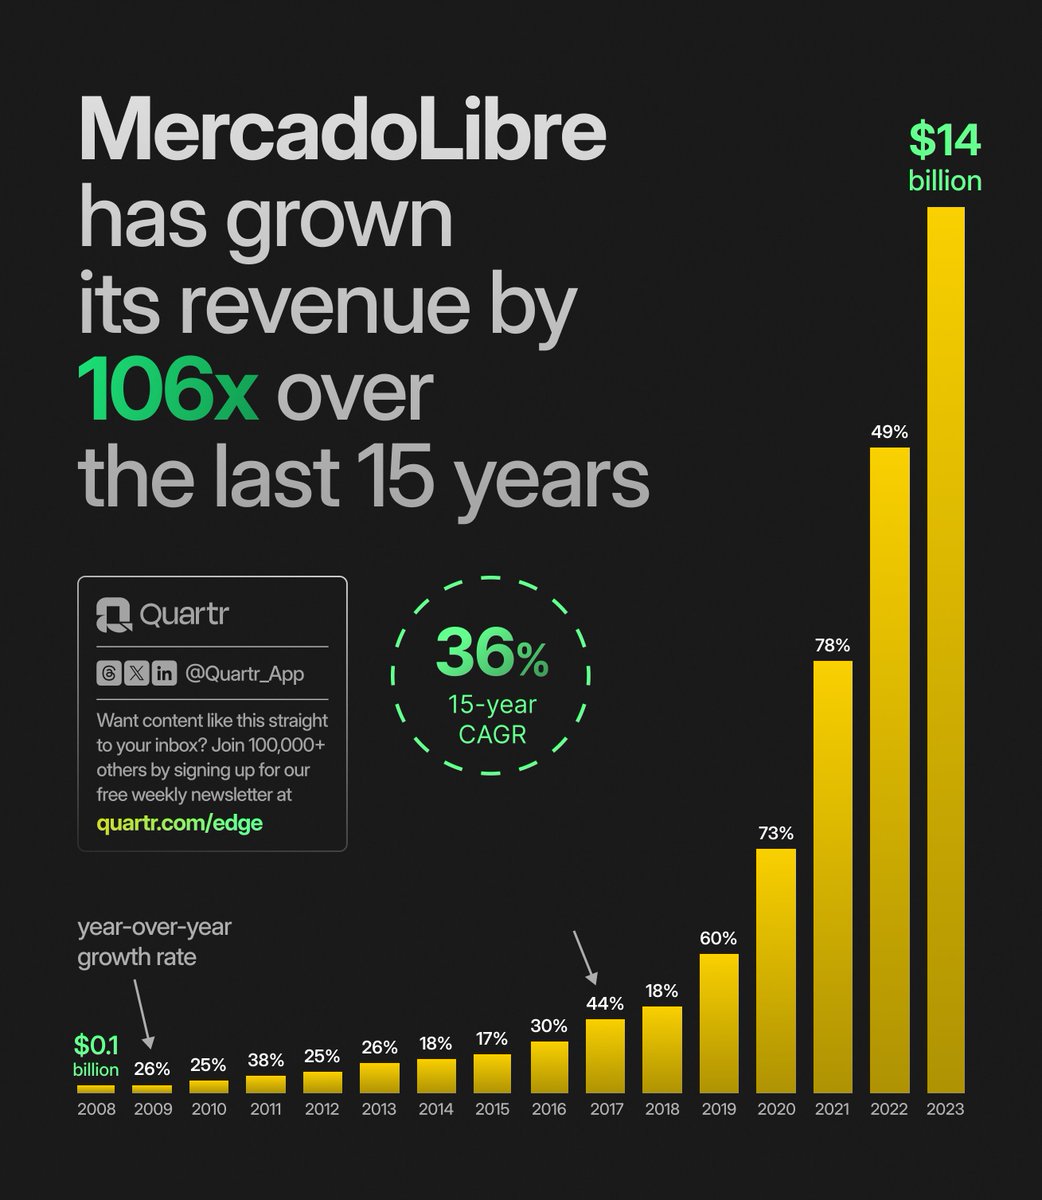 As the largest e-commerce platform and one of the leading fintech platforms in Latin America, $MELI has a financial history few can match. The company has maintained positive cash flow since its 2007 IPO, with revenue increasing 106x over the past 15 years: